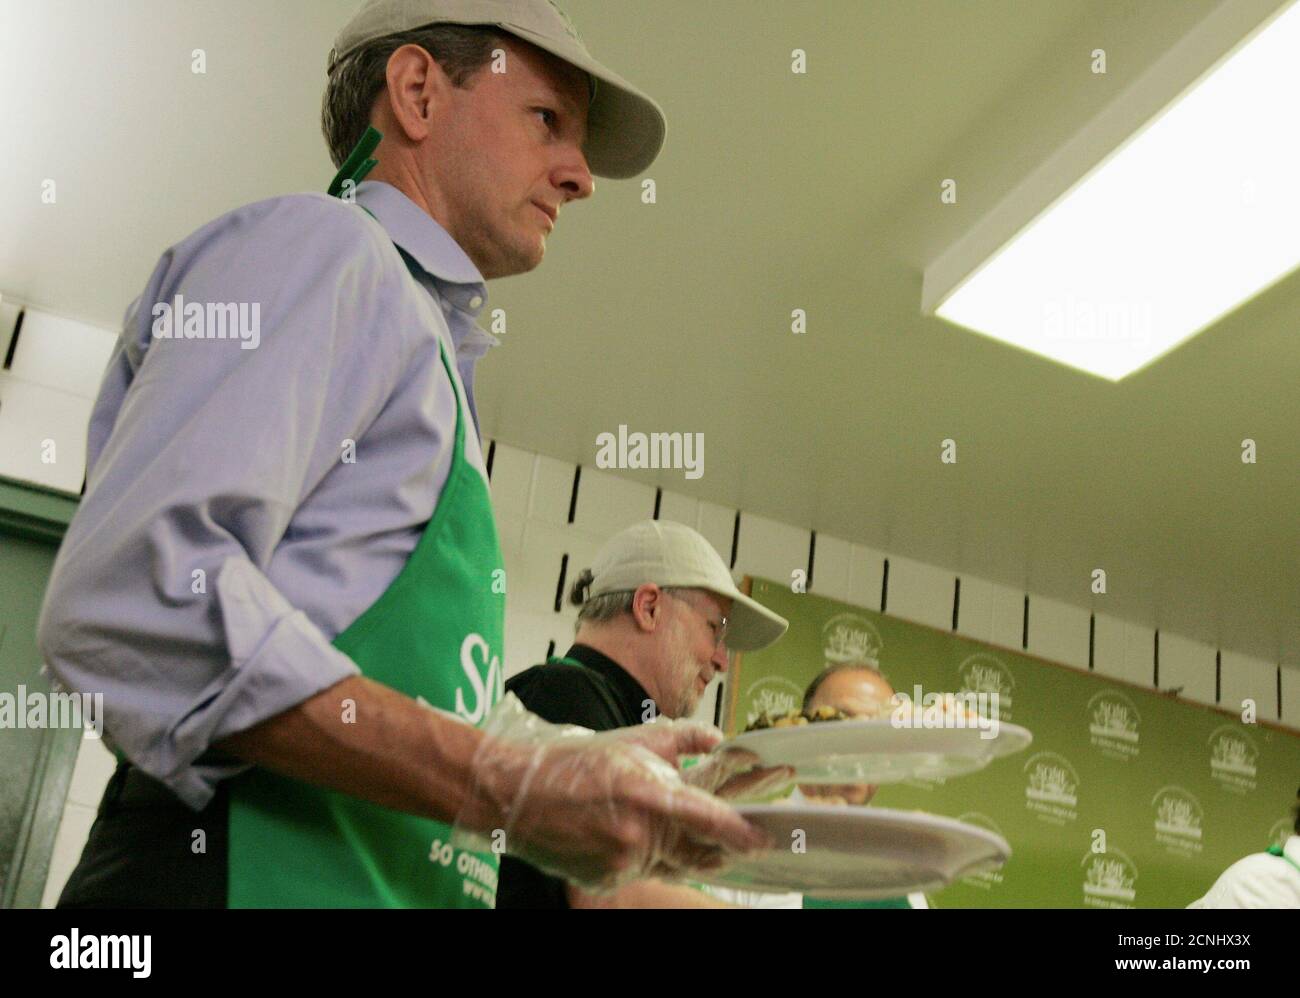 U.S. Treasury Secretary Timothy Geithner carries plates of food as he serves lunch to the homeless and other clients at the 'So Others May Eat'  (SOME) soup kitchen and social service center for the poor in downtown Washington, June 25, 2009.    REUTERS/Jim Bourg  (UNITED STATES POLITICS) Stock Photo